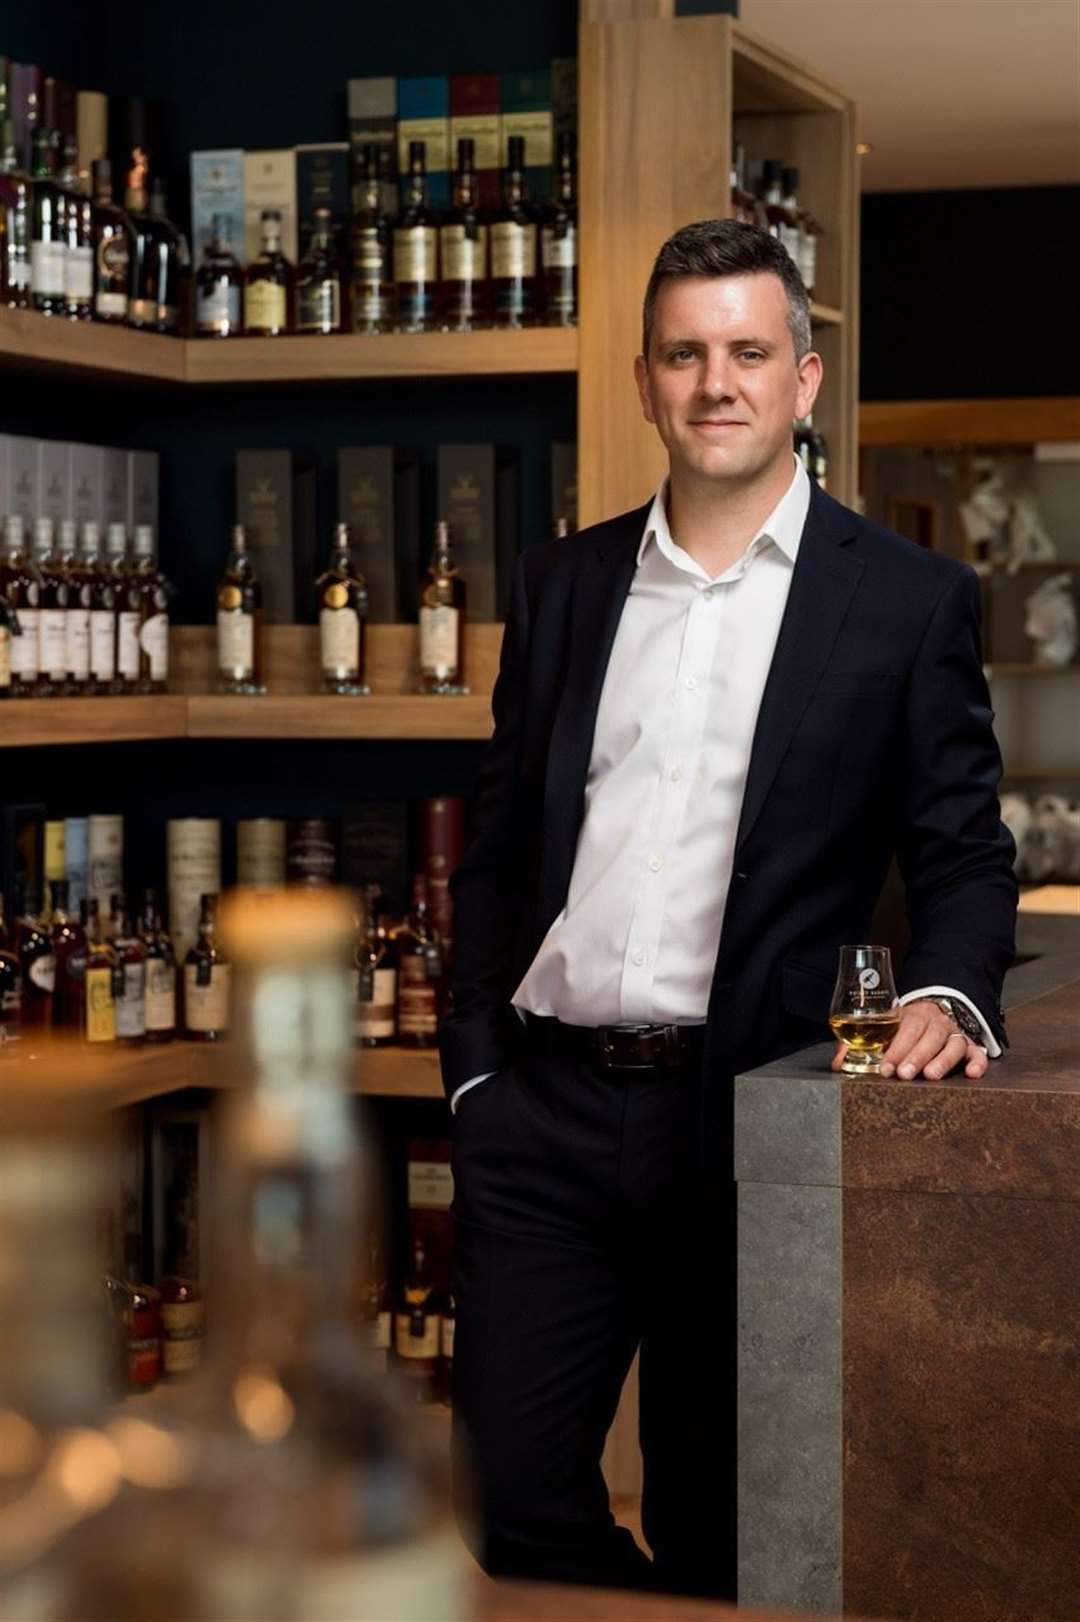 Daniel Milne, managing director and co-founder of Whisky Hammer.